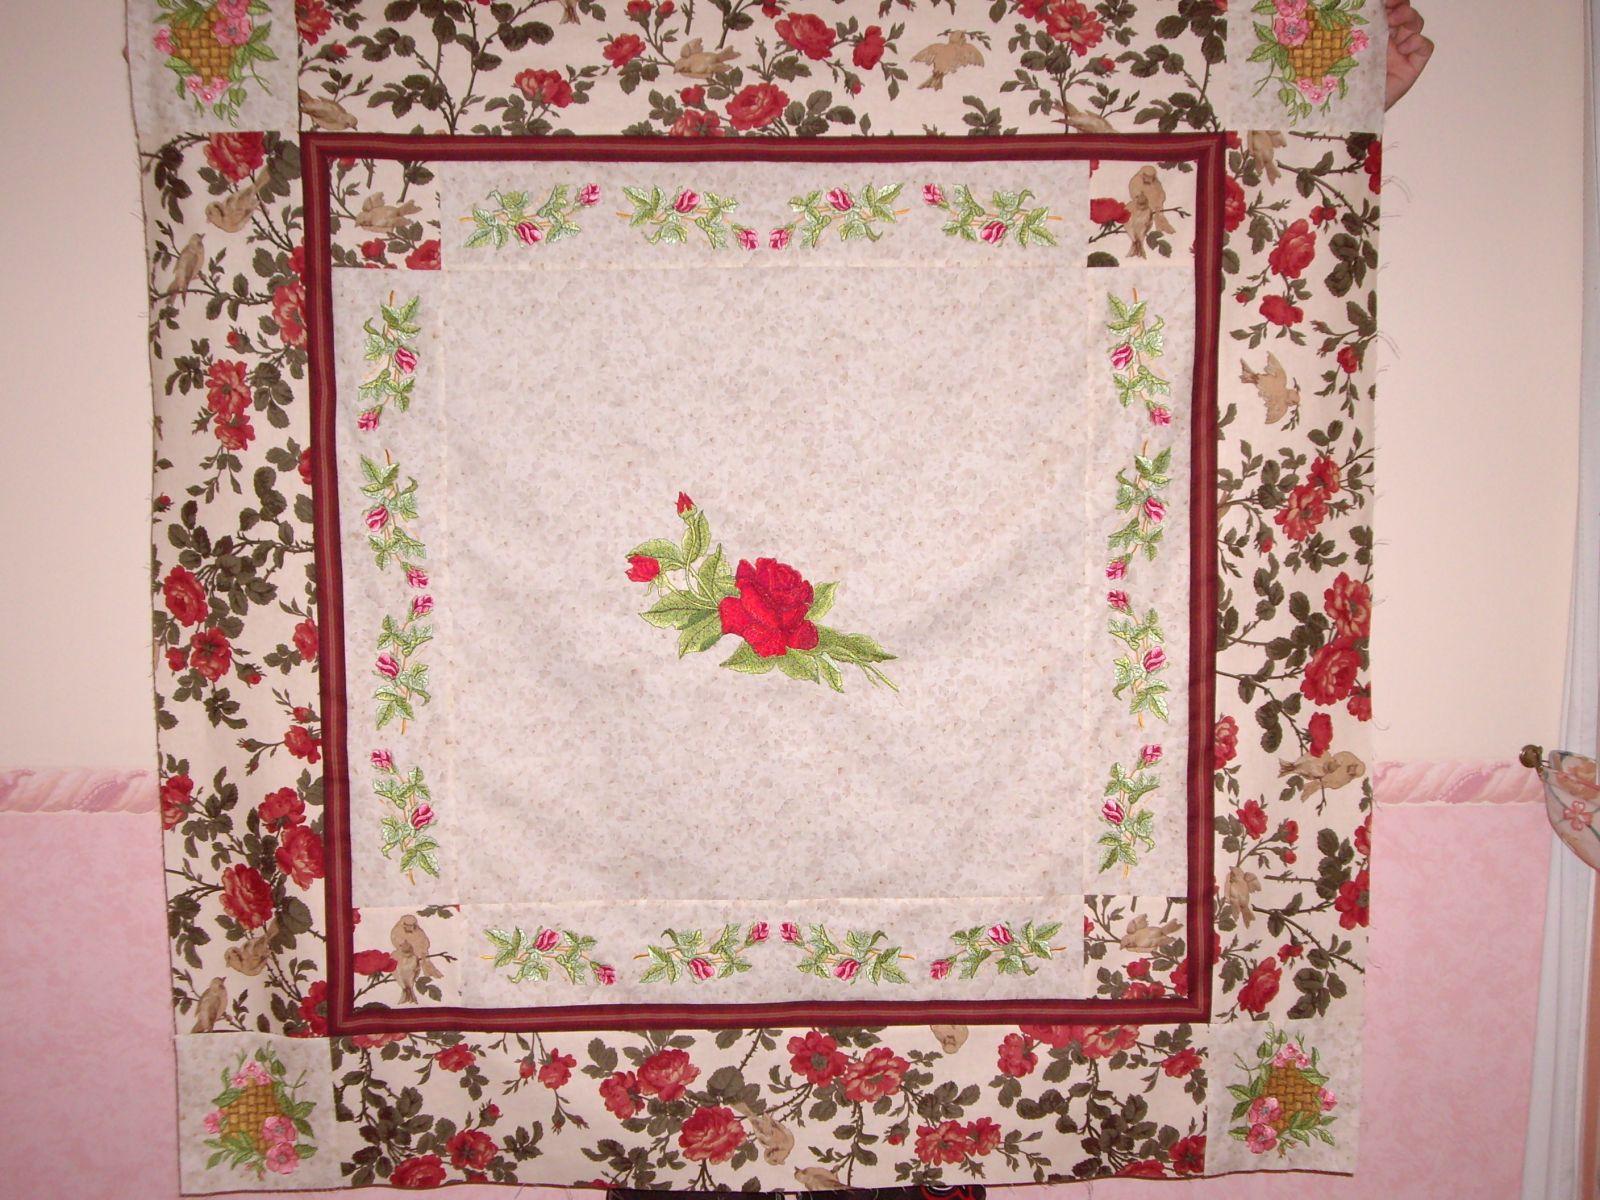 The rose garden embroidery at quilt